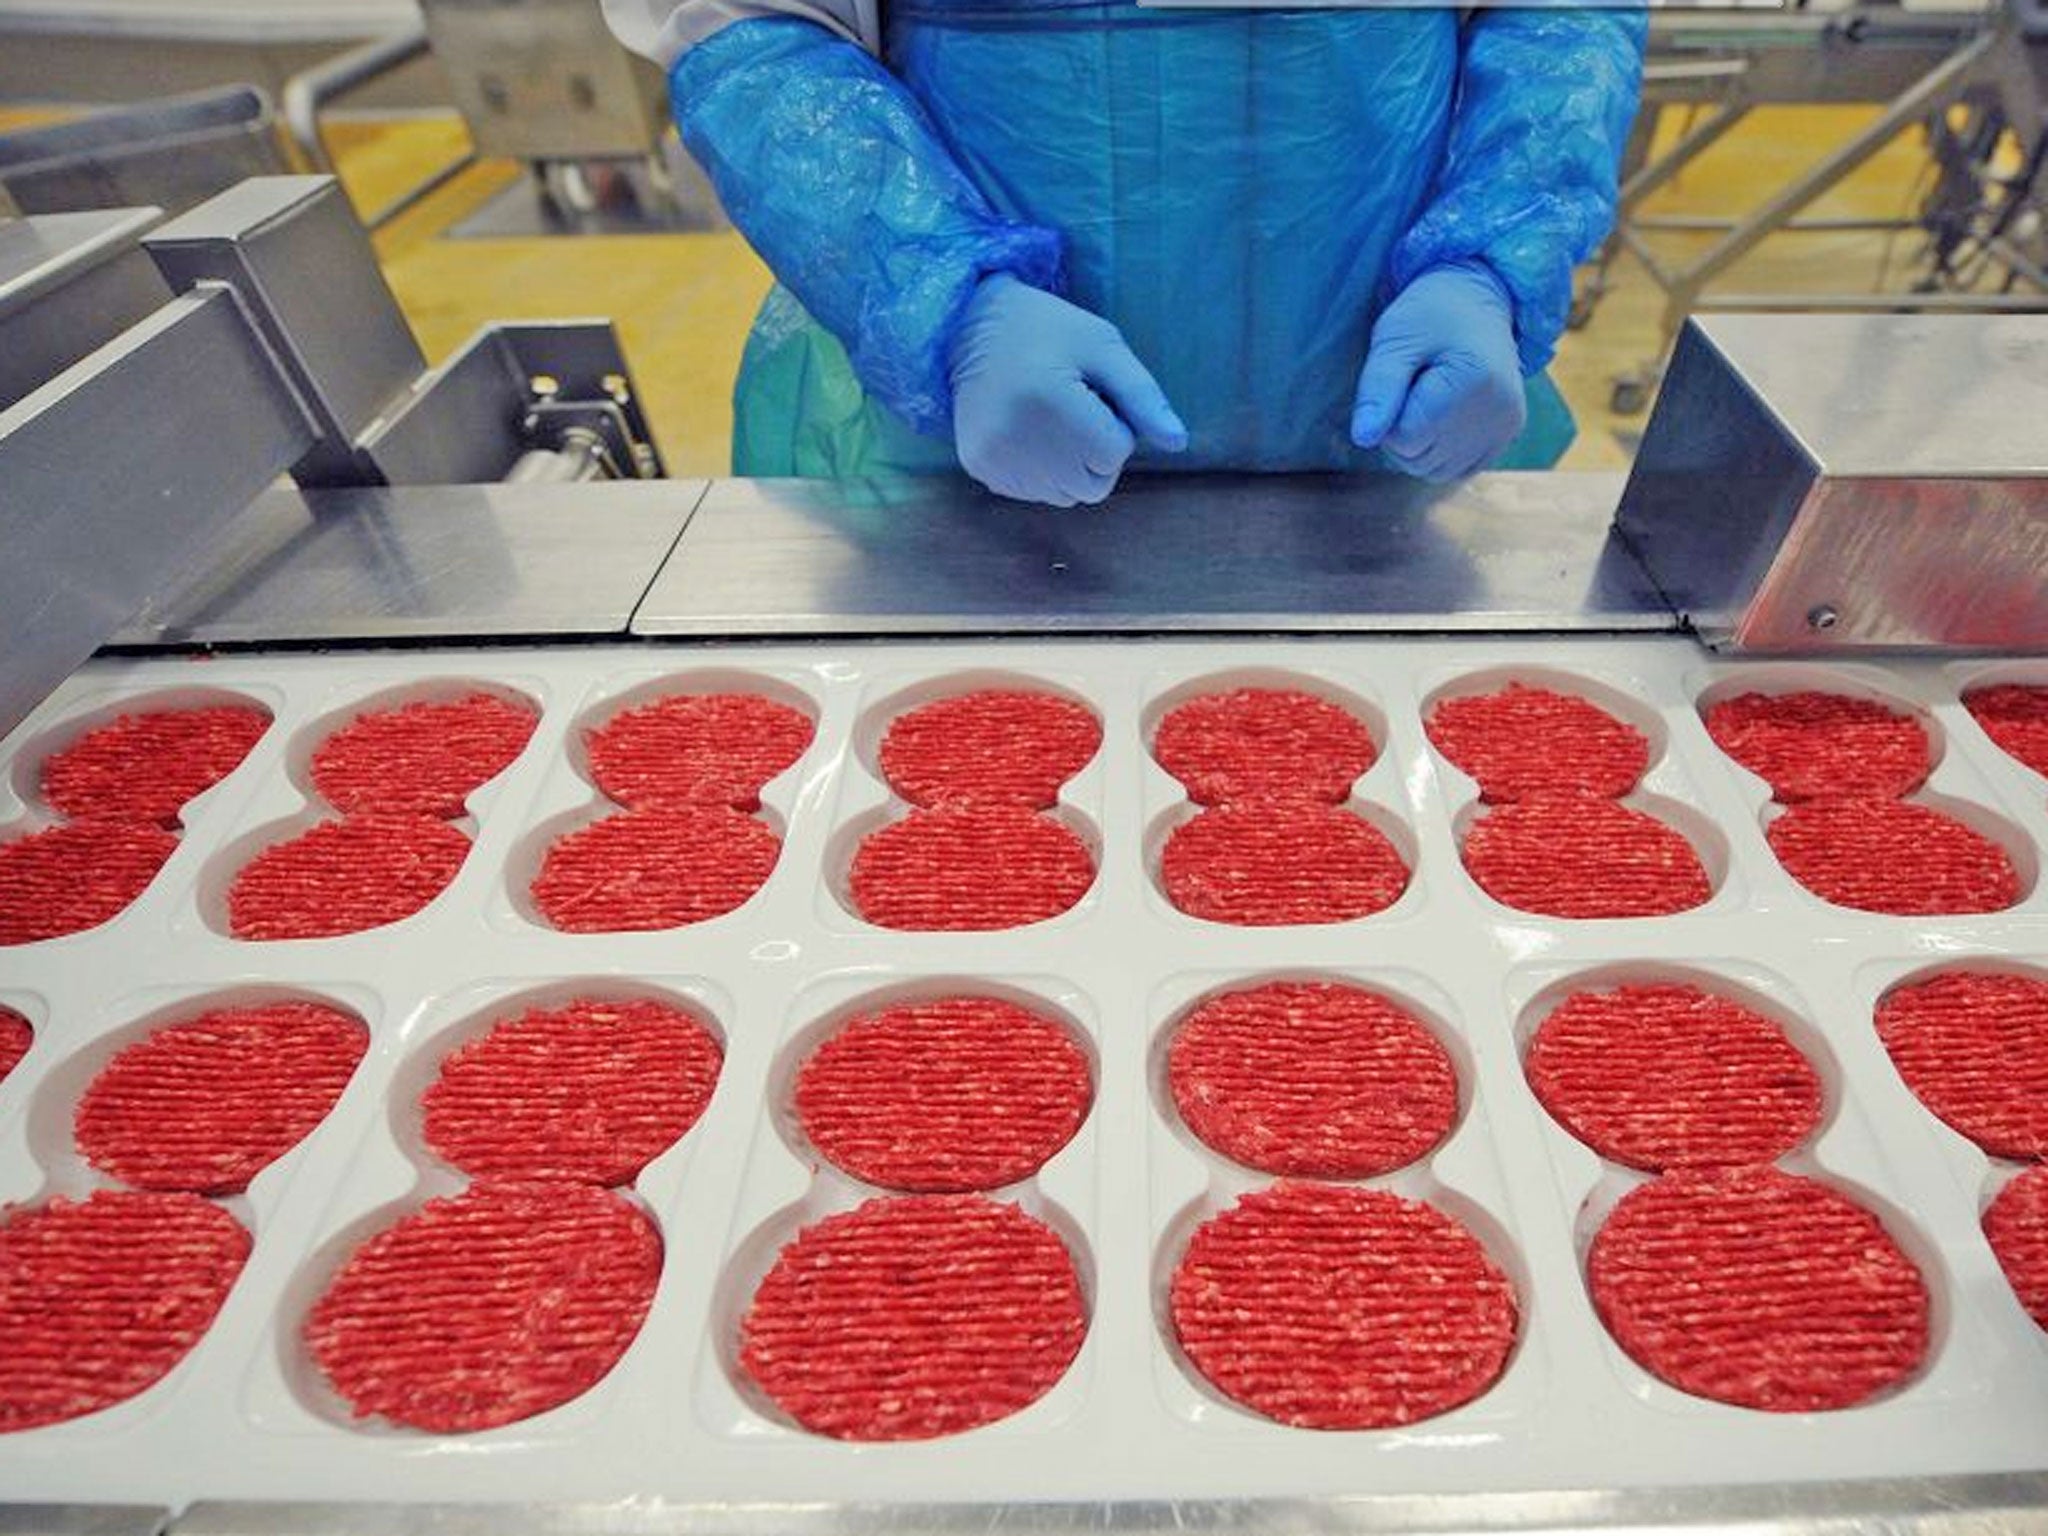 French meat food industrial factory, working on the production chain of beef steaks. A Europe-wide food fraud scandal over horsemeat sold as beef deepened as Romania announced an inquiry into the origin of the meat and suspicions of criminal activity moun